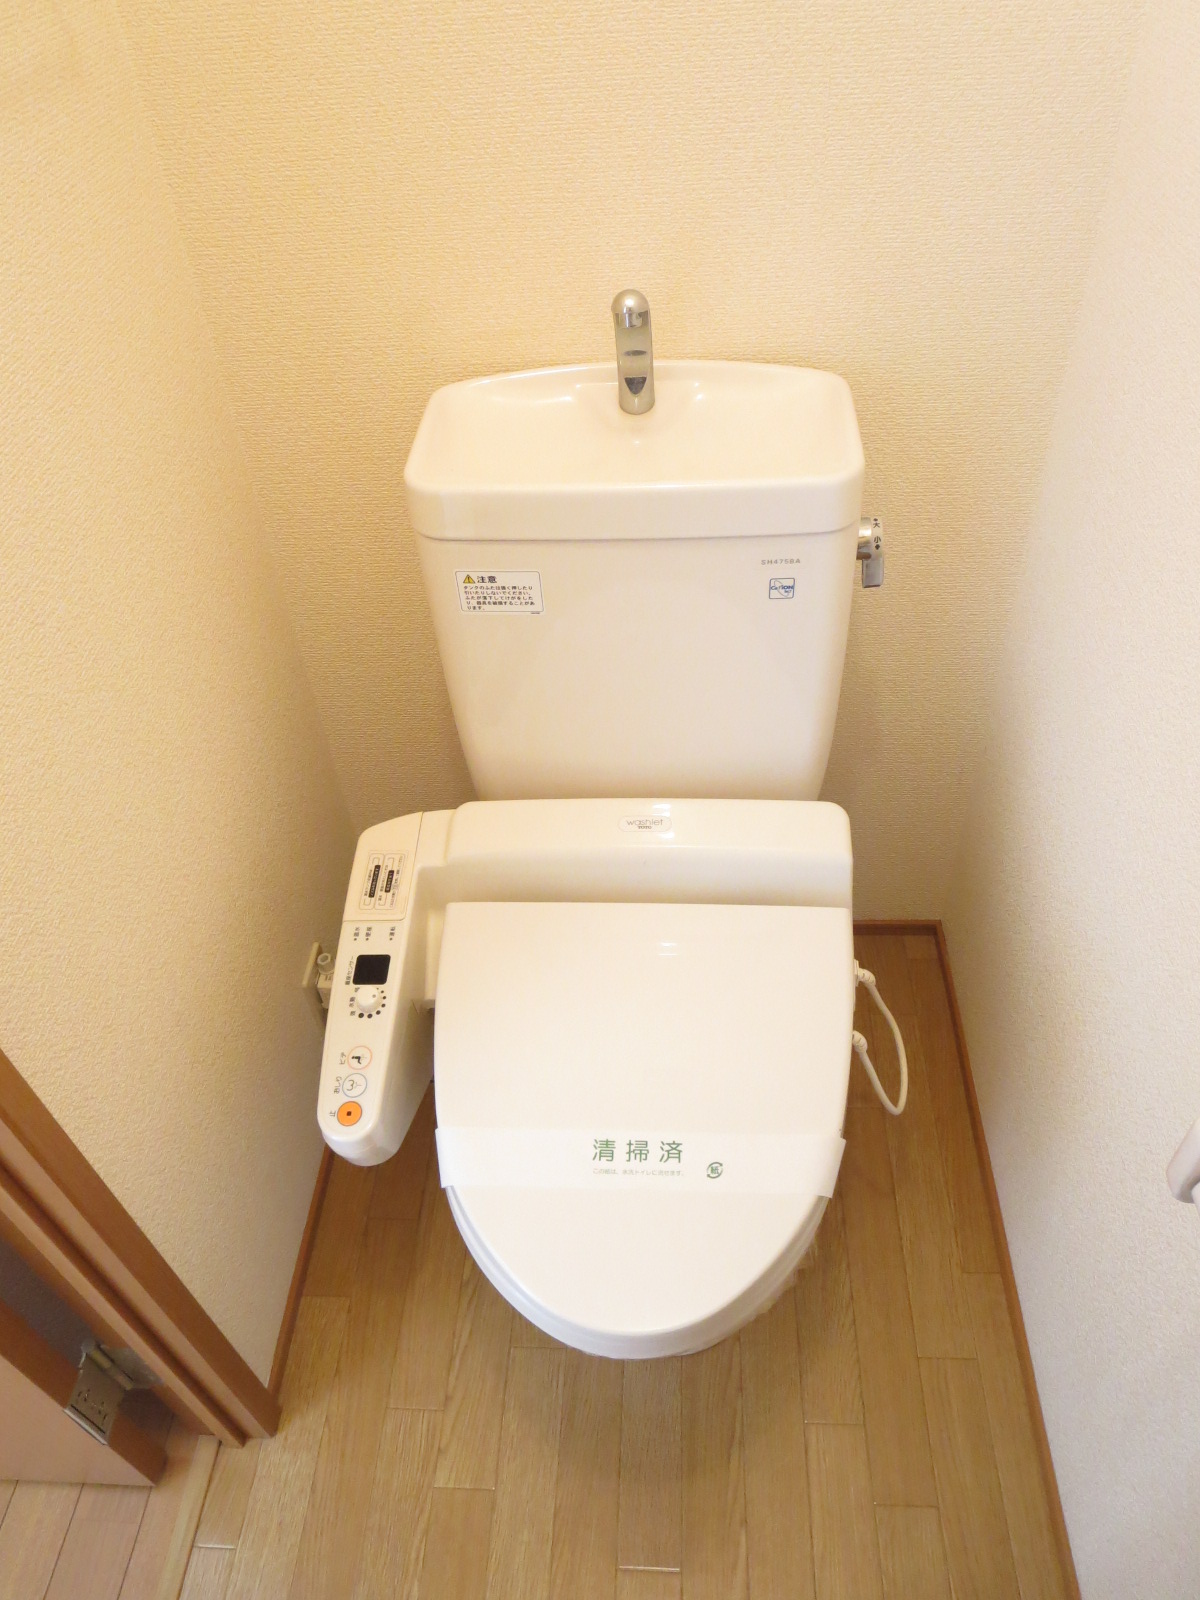 Toilet. Comfortable with a washing toilet seat